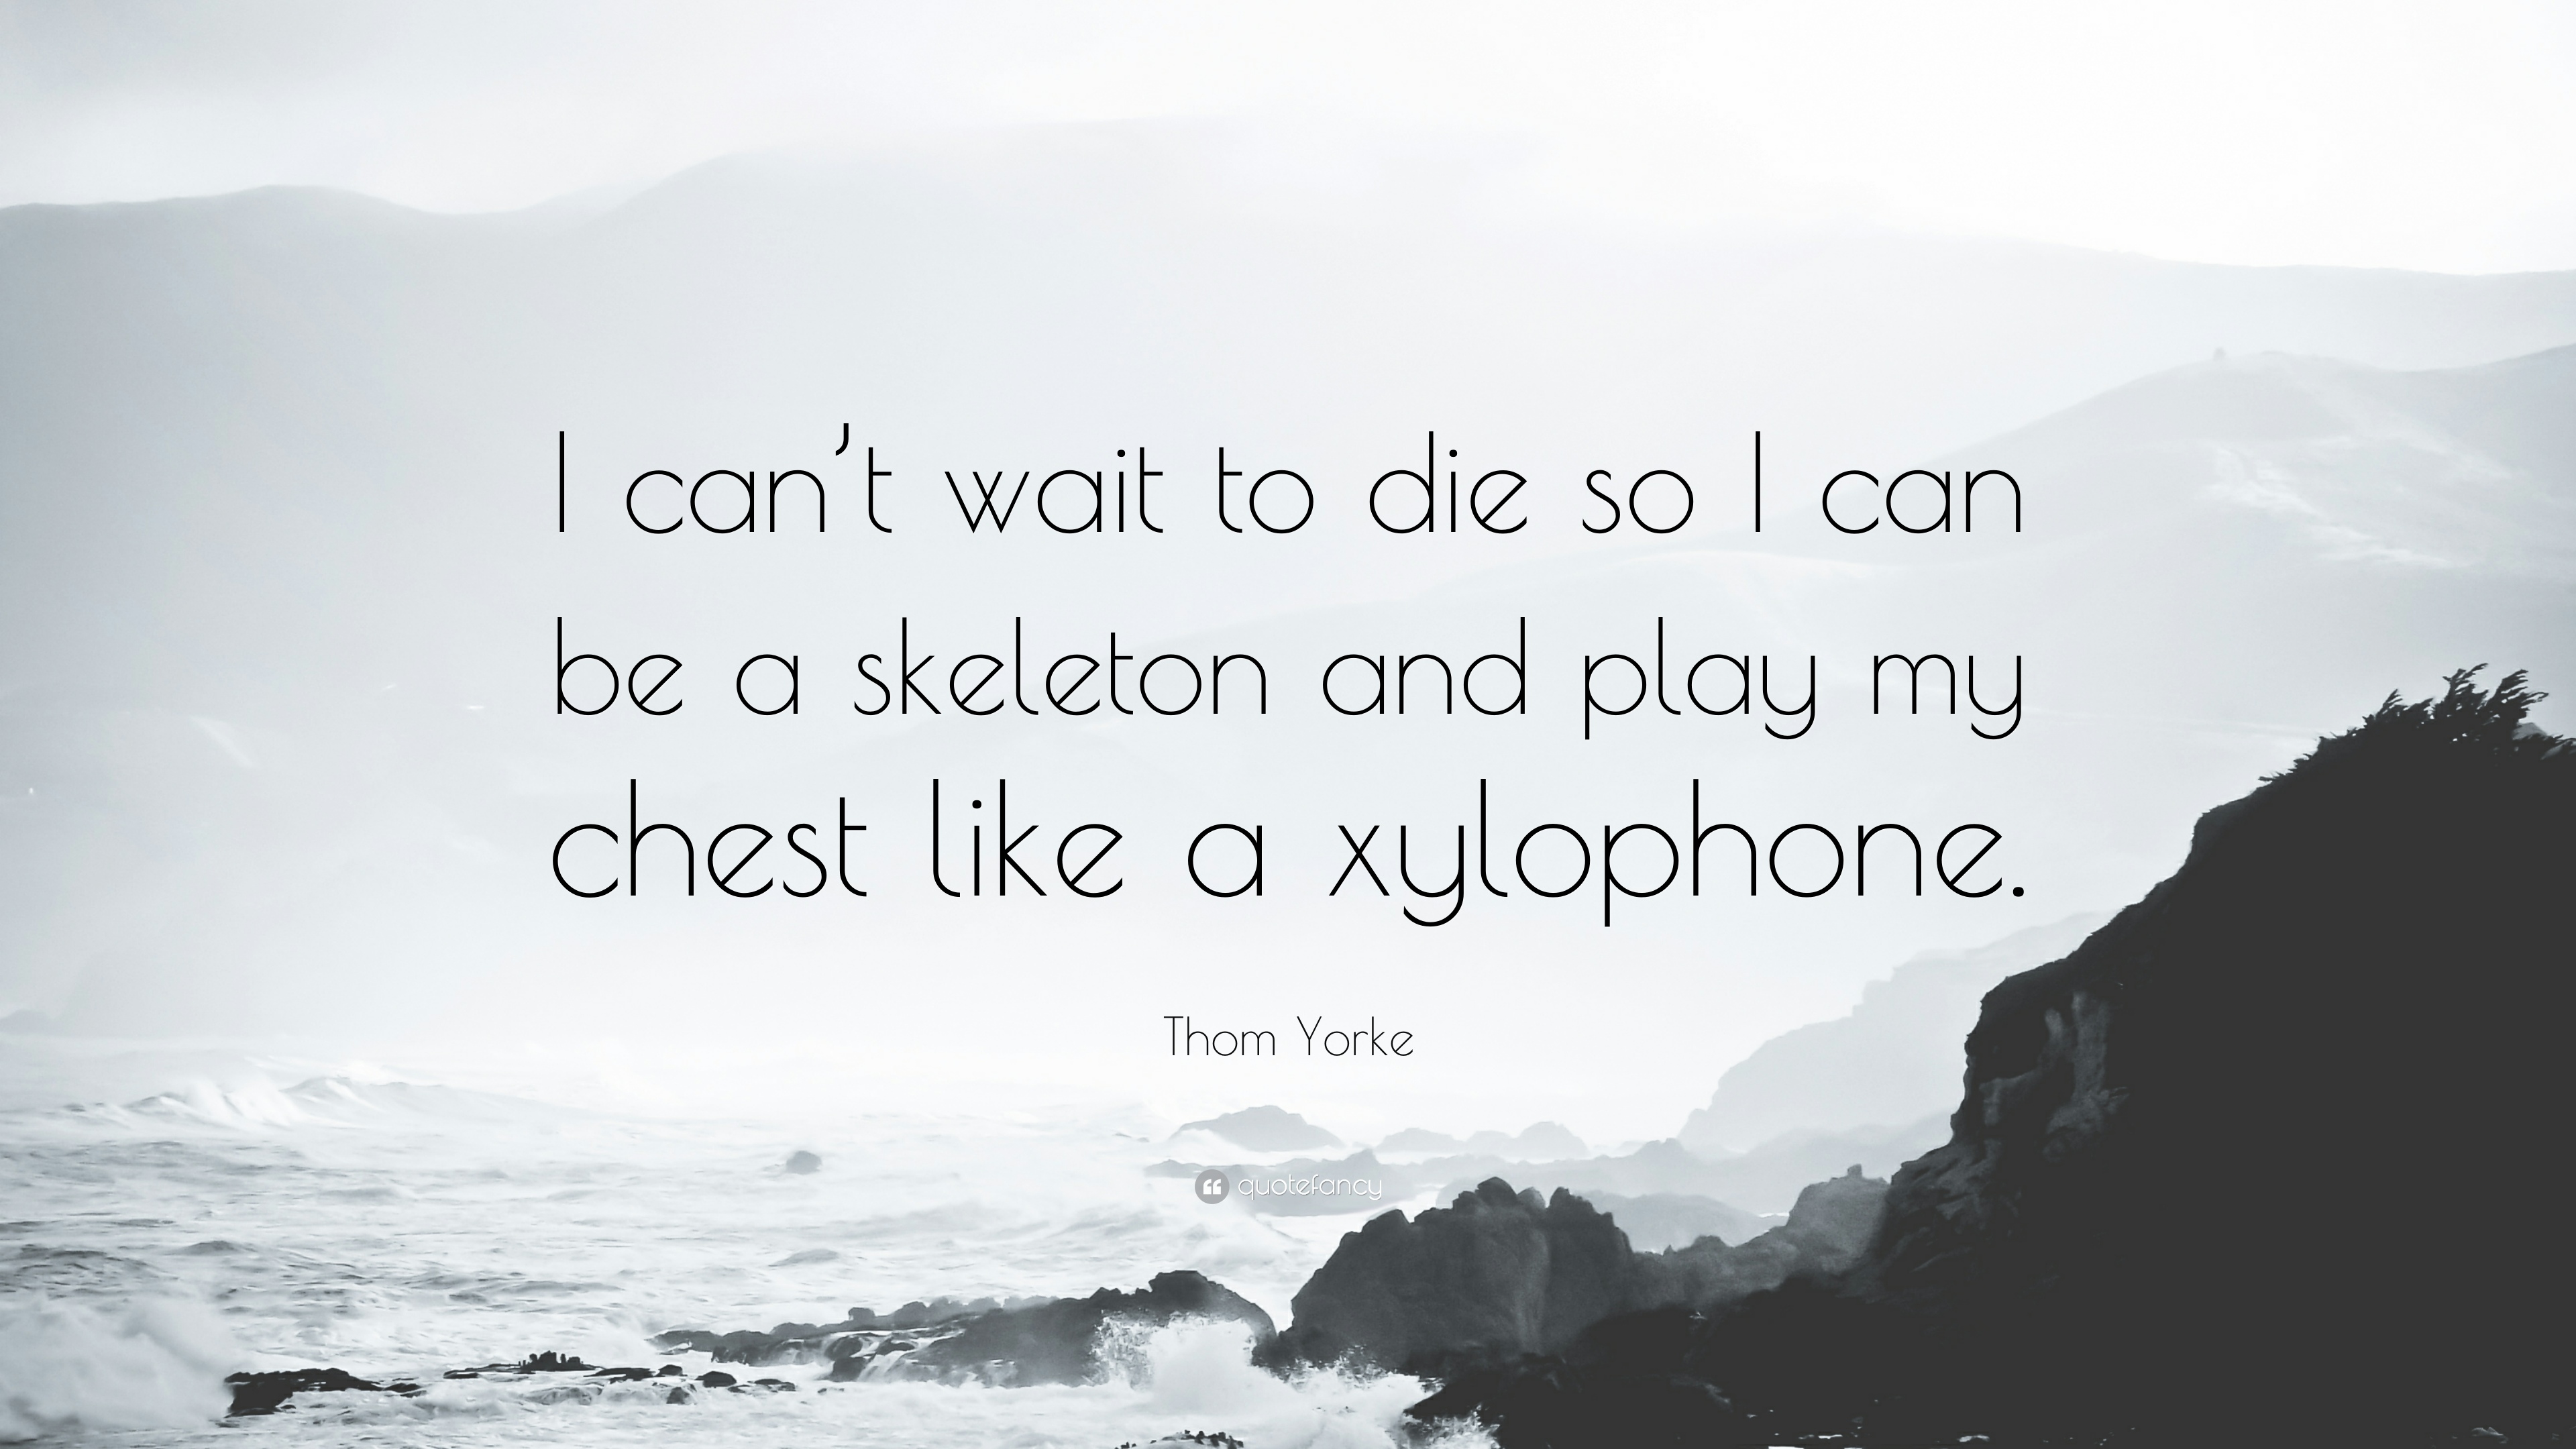 Thom Yorke Quote: “I can't wait to die so I can be a skeleton